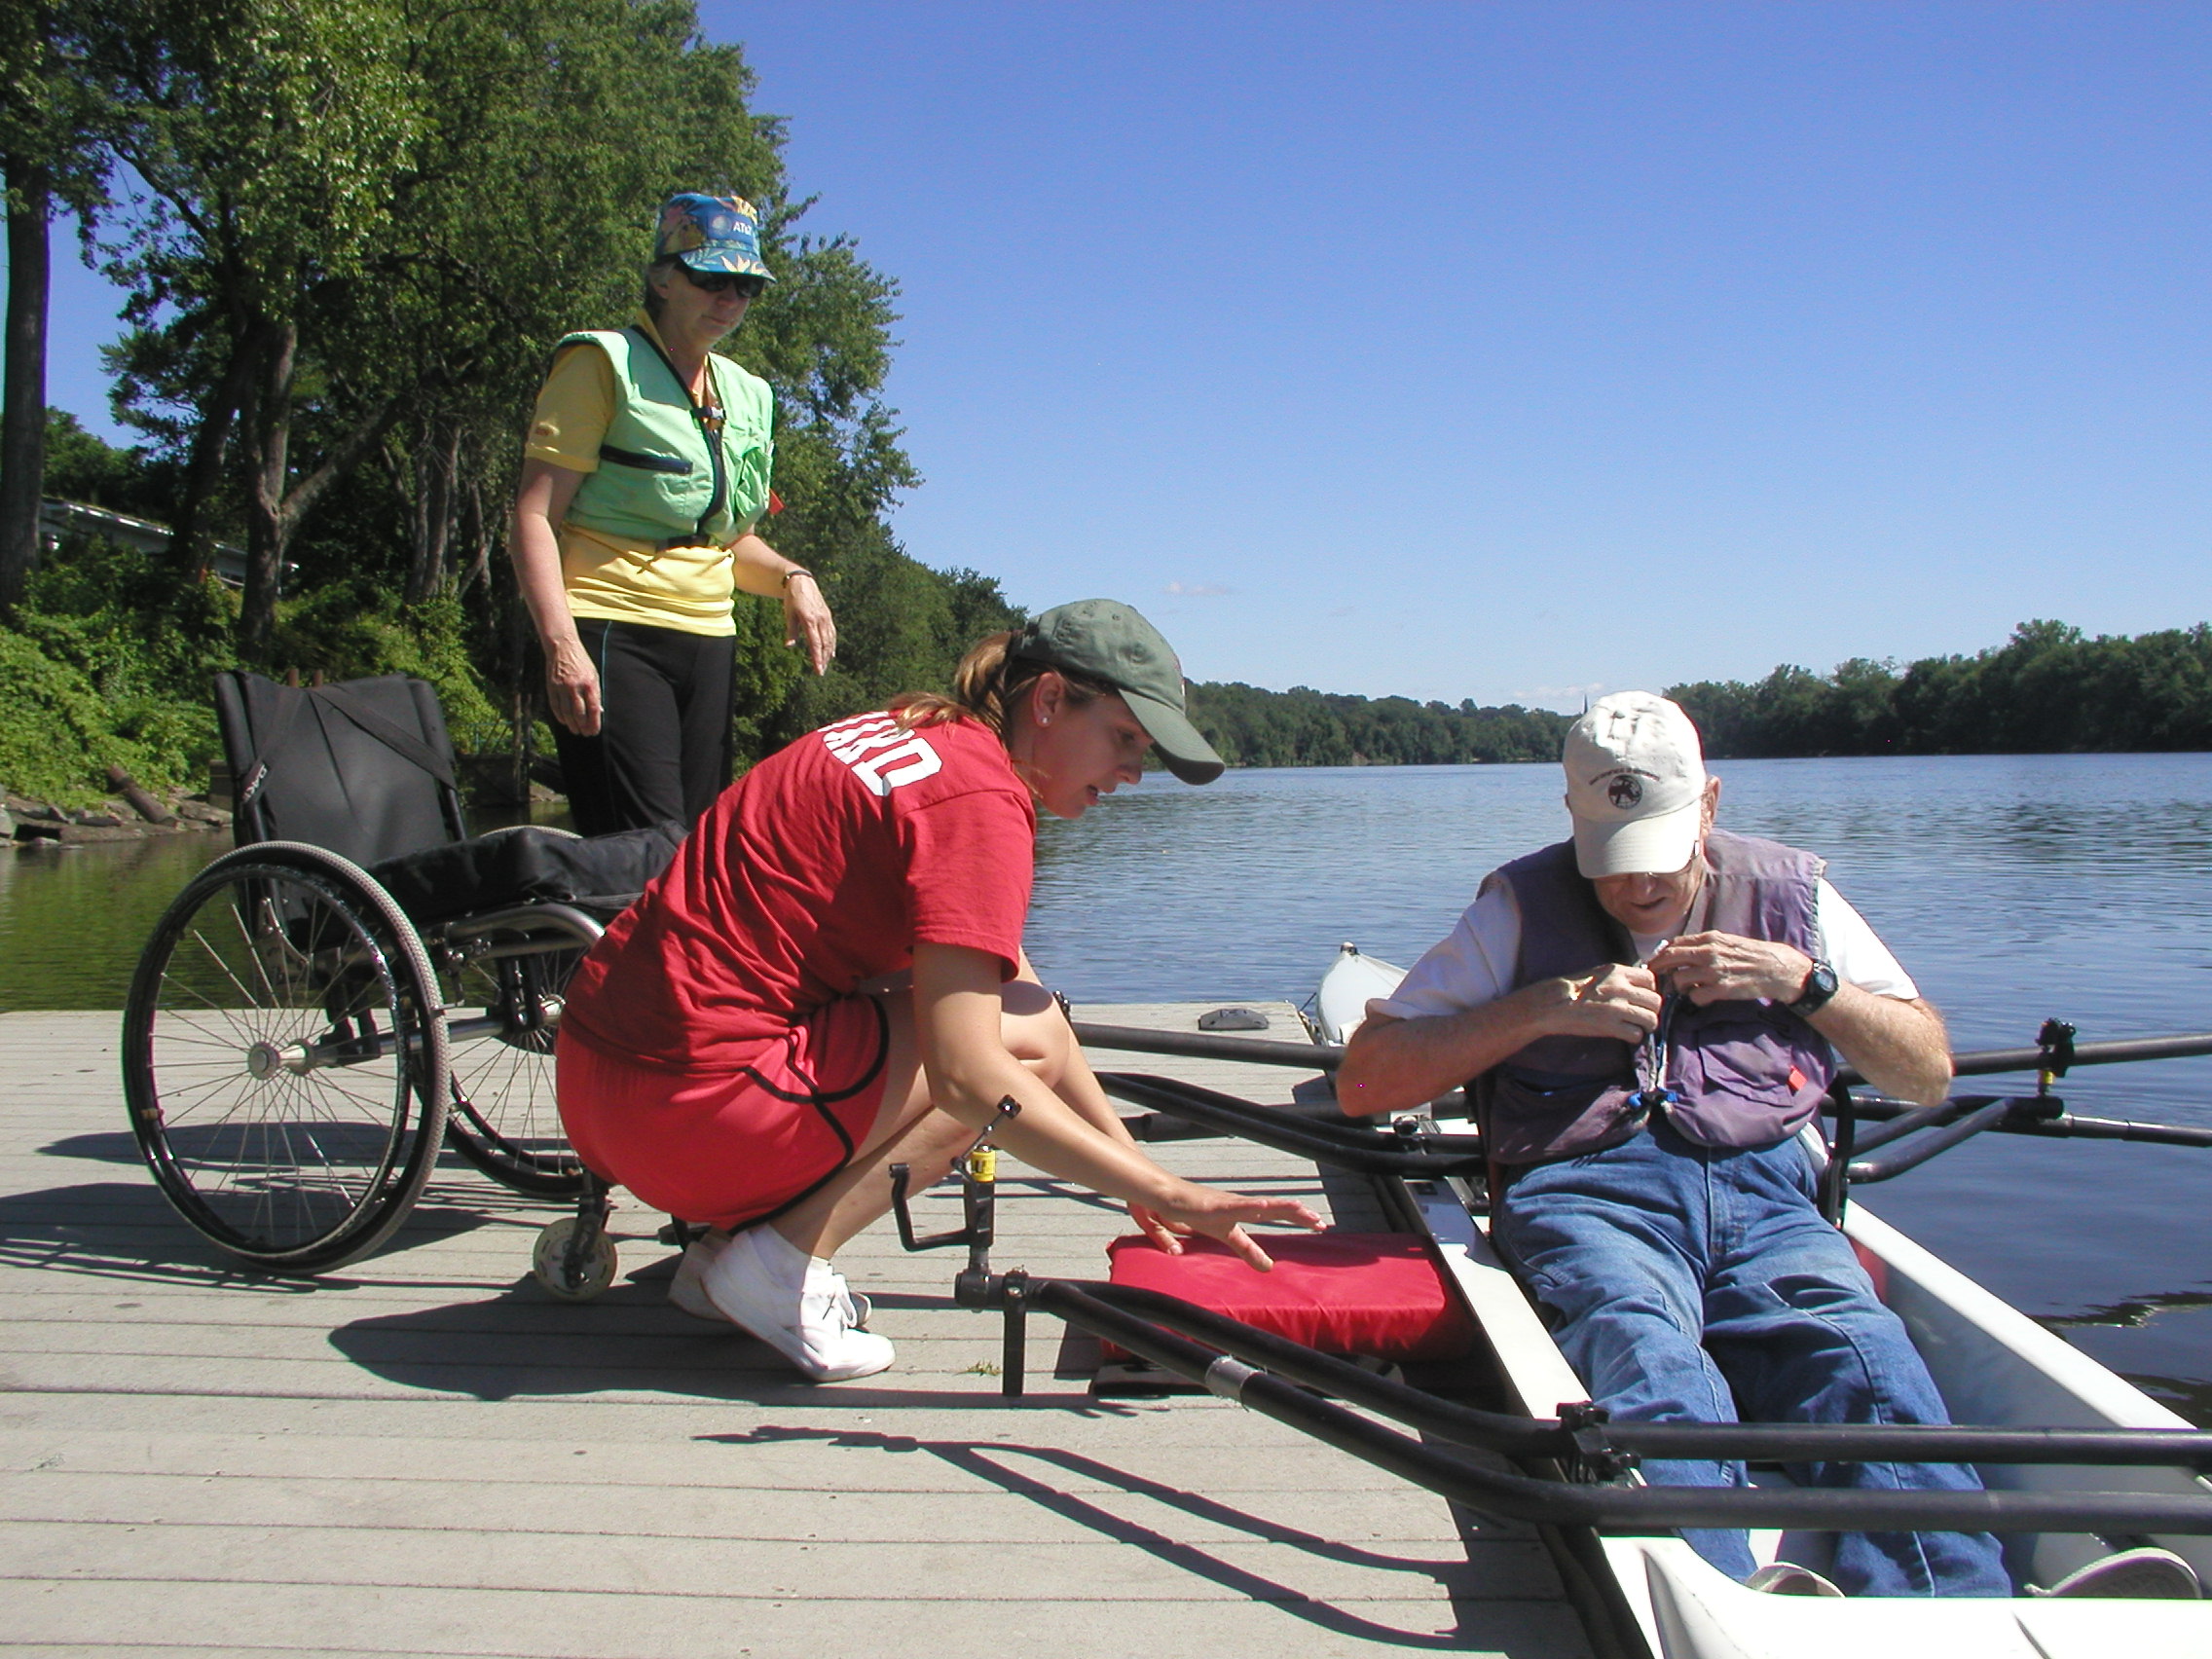 A rower is sitting in a shell in the water next to a dock. A lifeguard on the dock is adjusting a cushion placed on the dock next to the rower. Another person is standing next to a wheelchair on the dock.